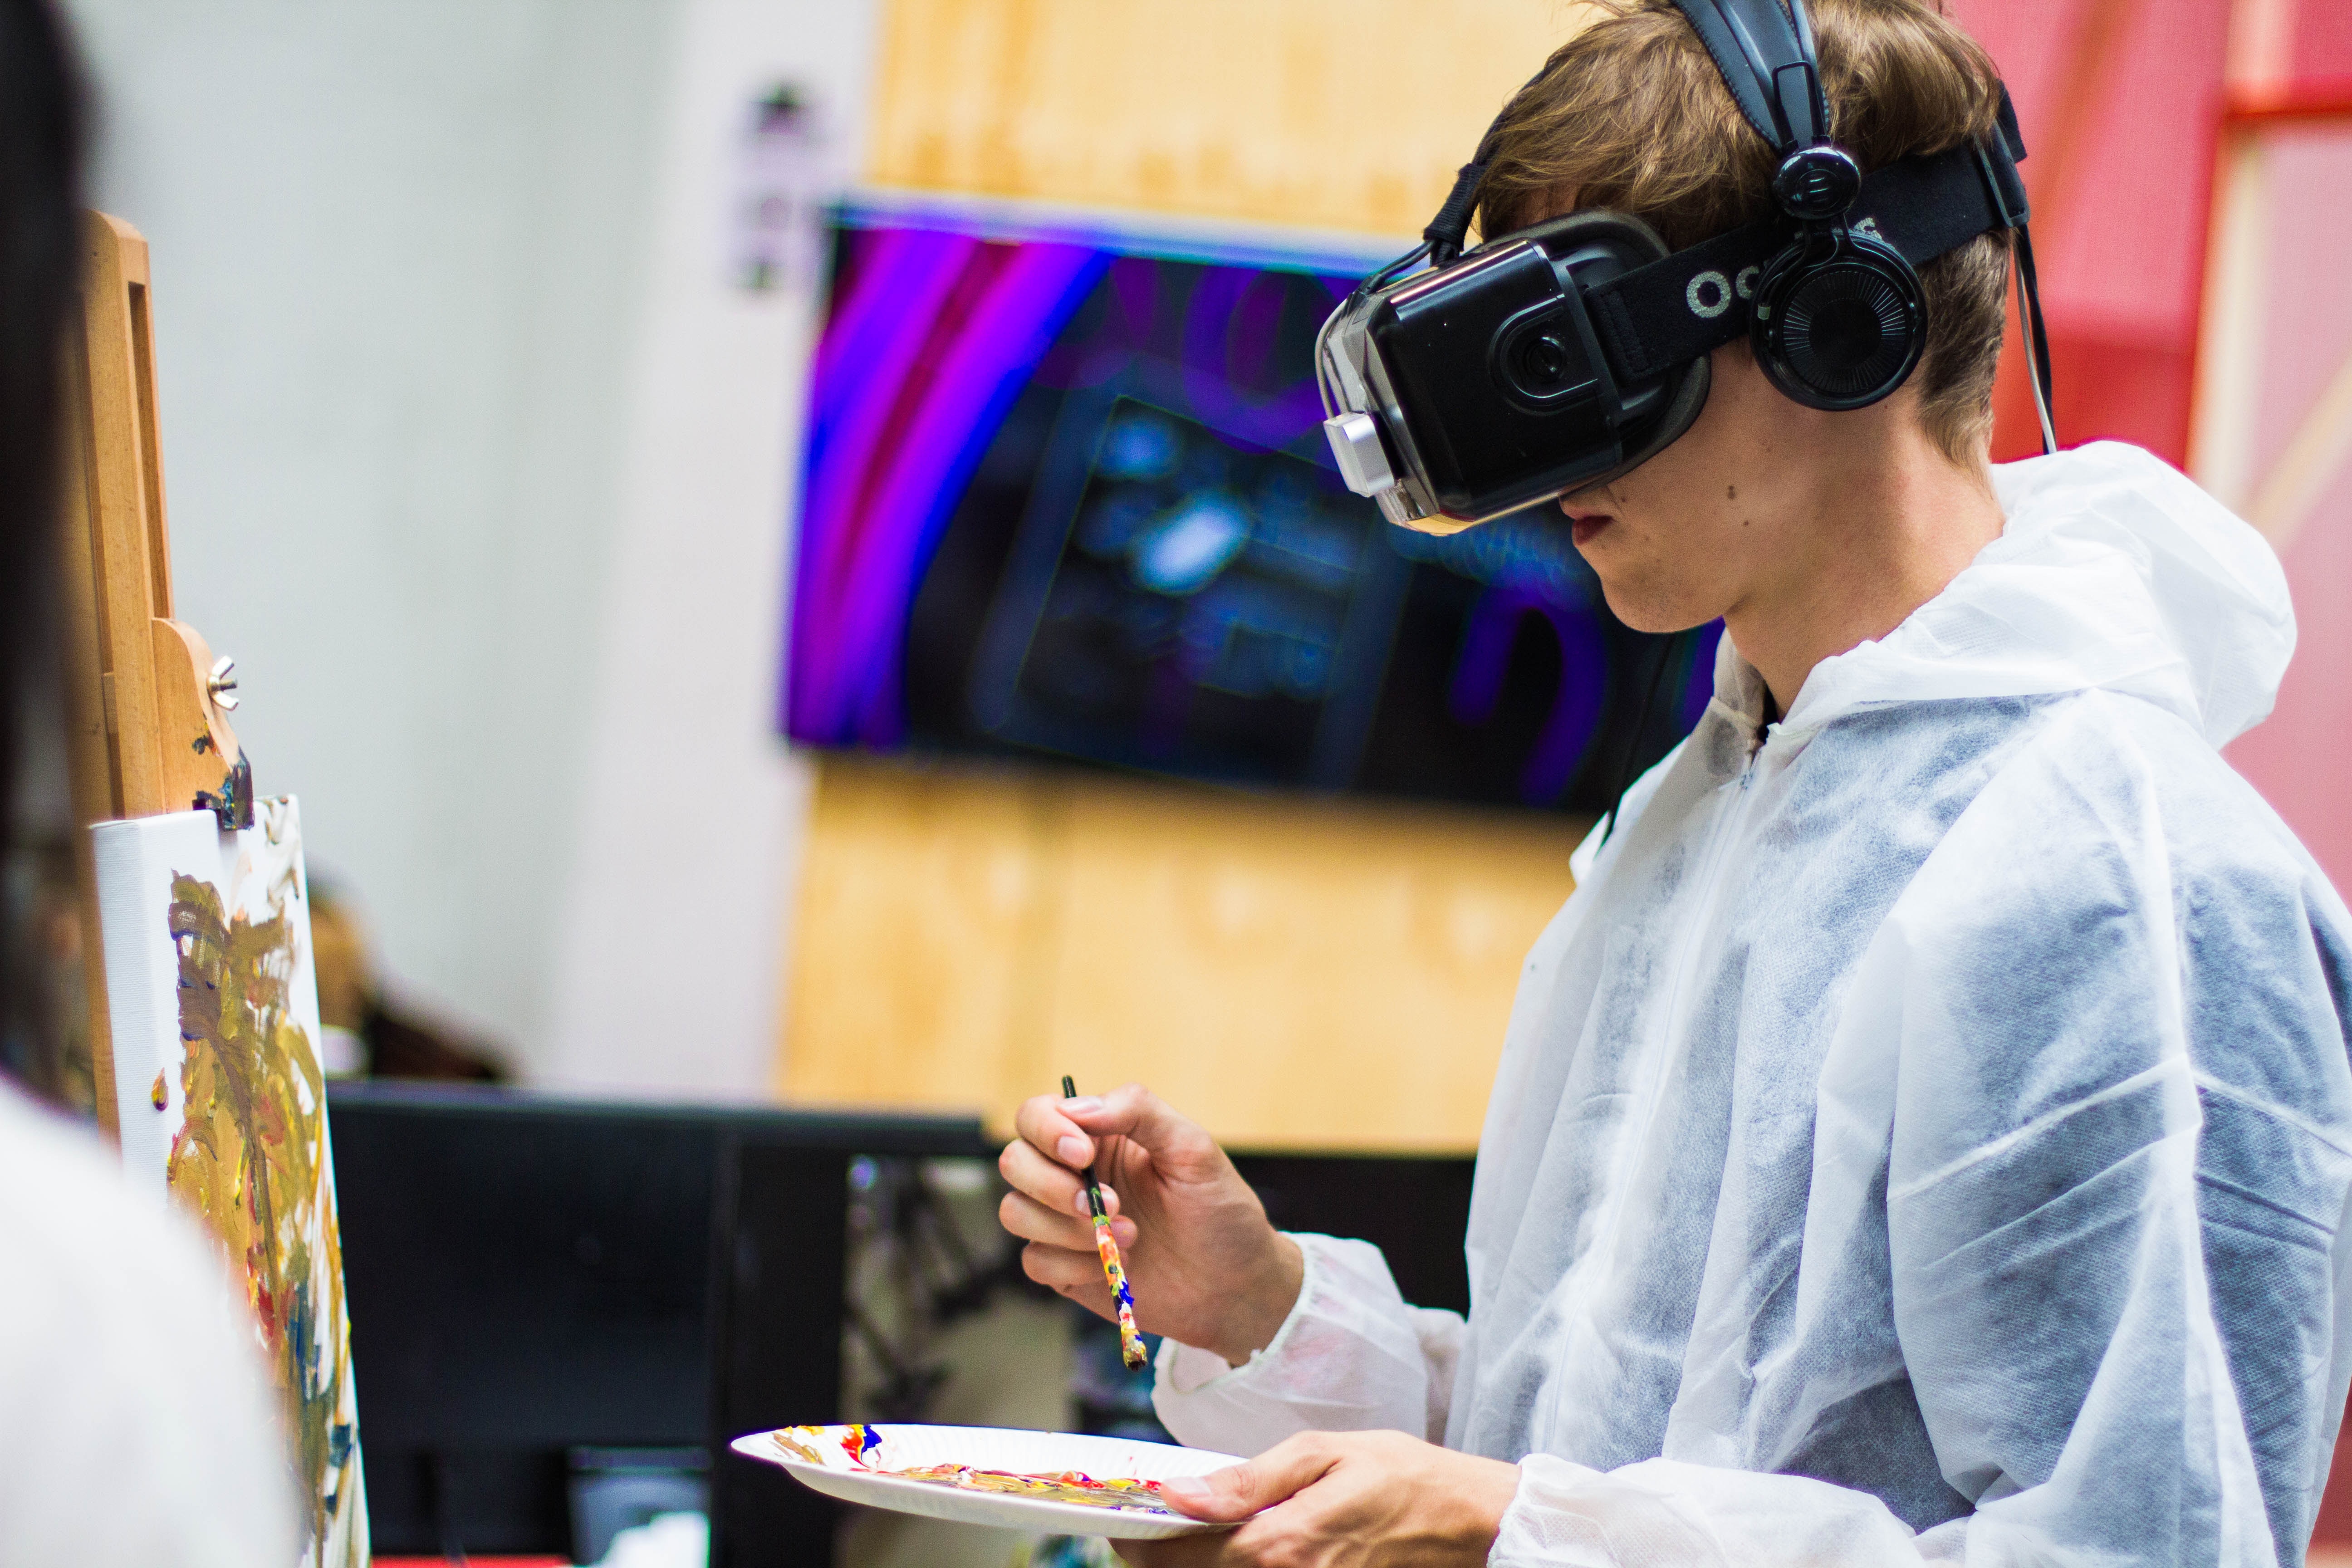 Teenage boy painting while wearing VR glasses